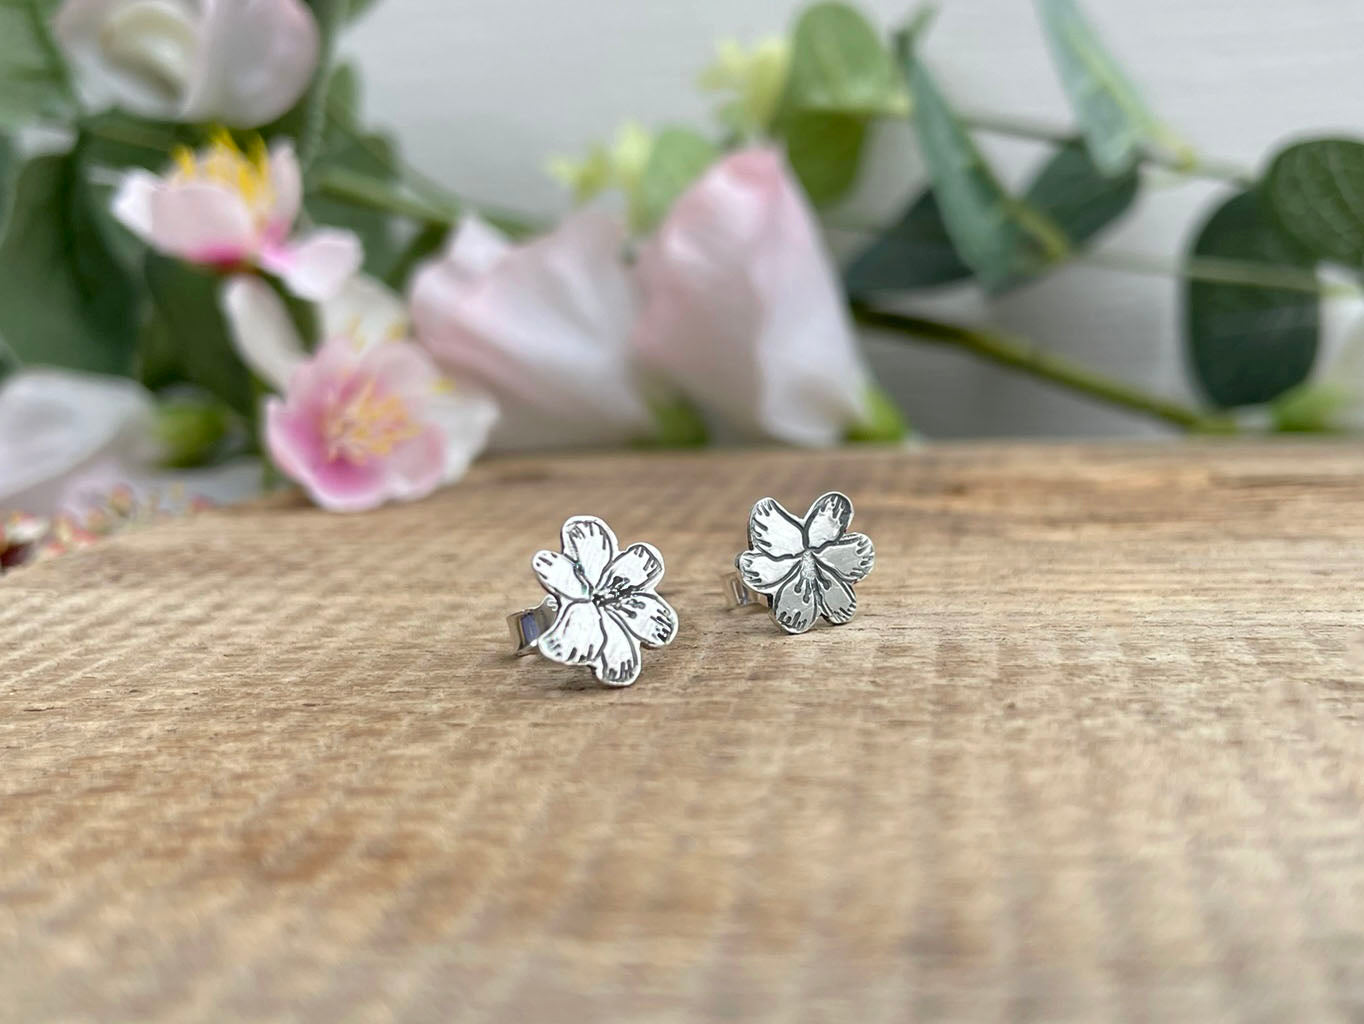 Oxidised Silver Blossom Stud Earrings by Curious Magpie Jewellery